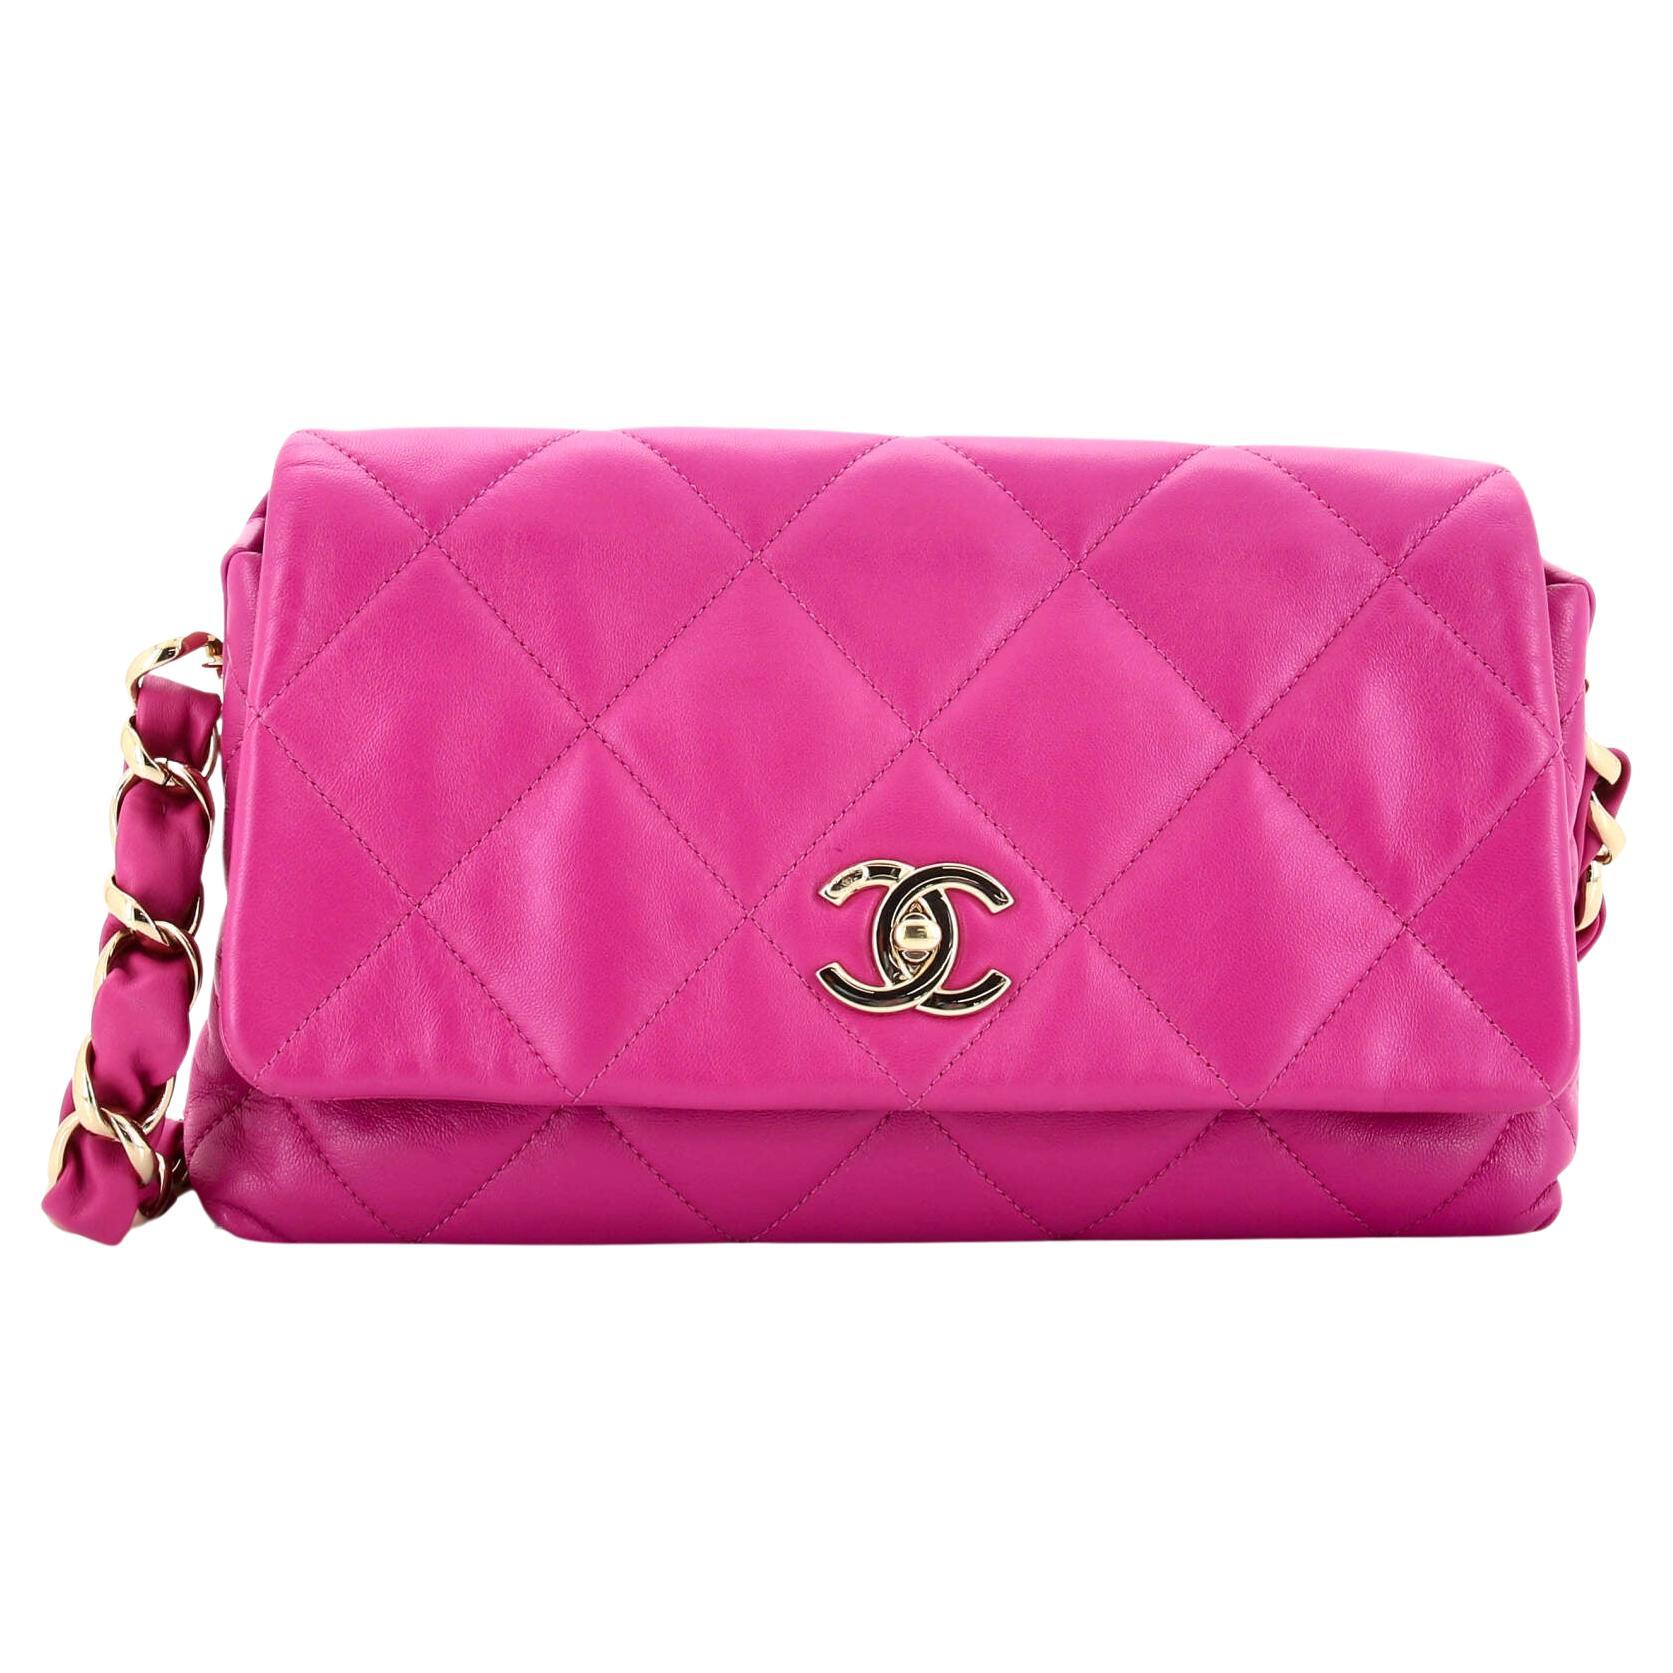 Chanel Chain Strap - 1,463 For Sale on 1stDibs  chanel crossbody strap, chanel  handbag chain strap, chanel straps for bags